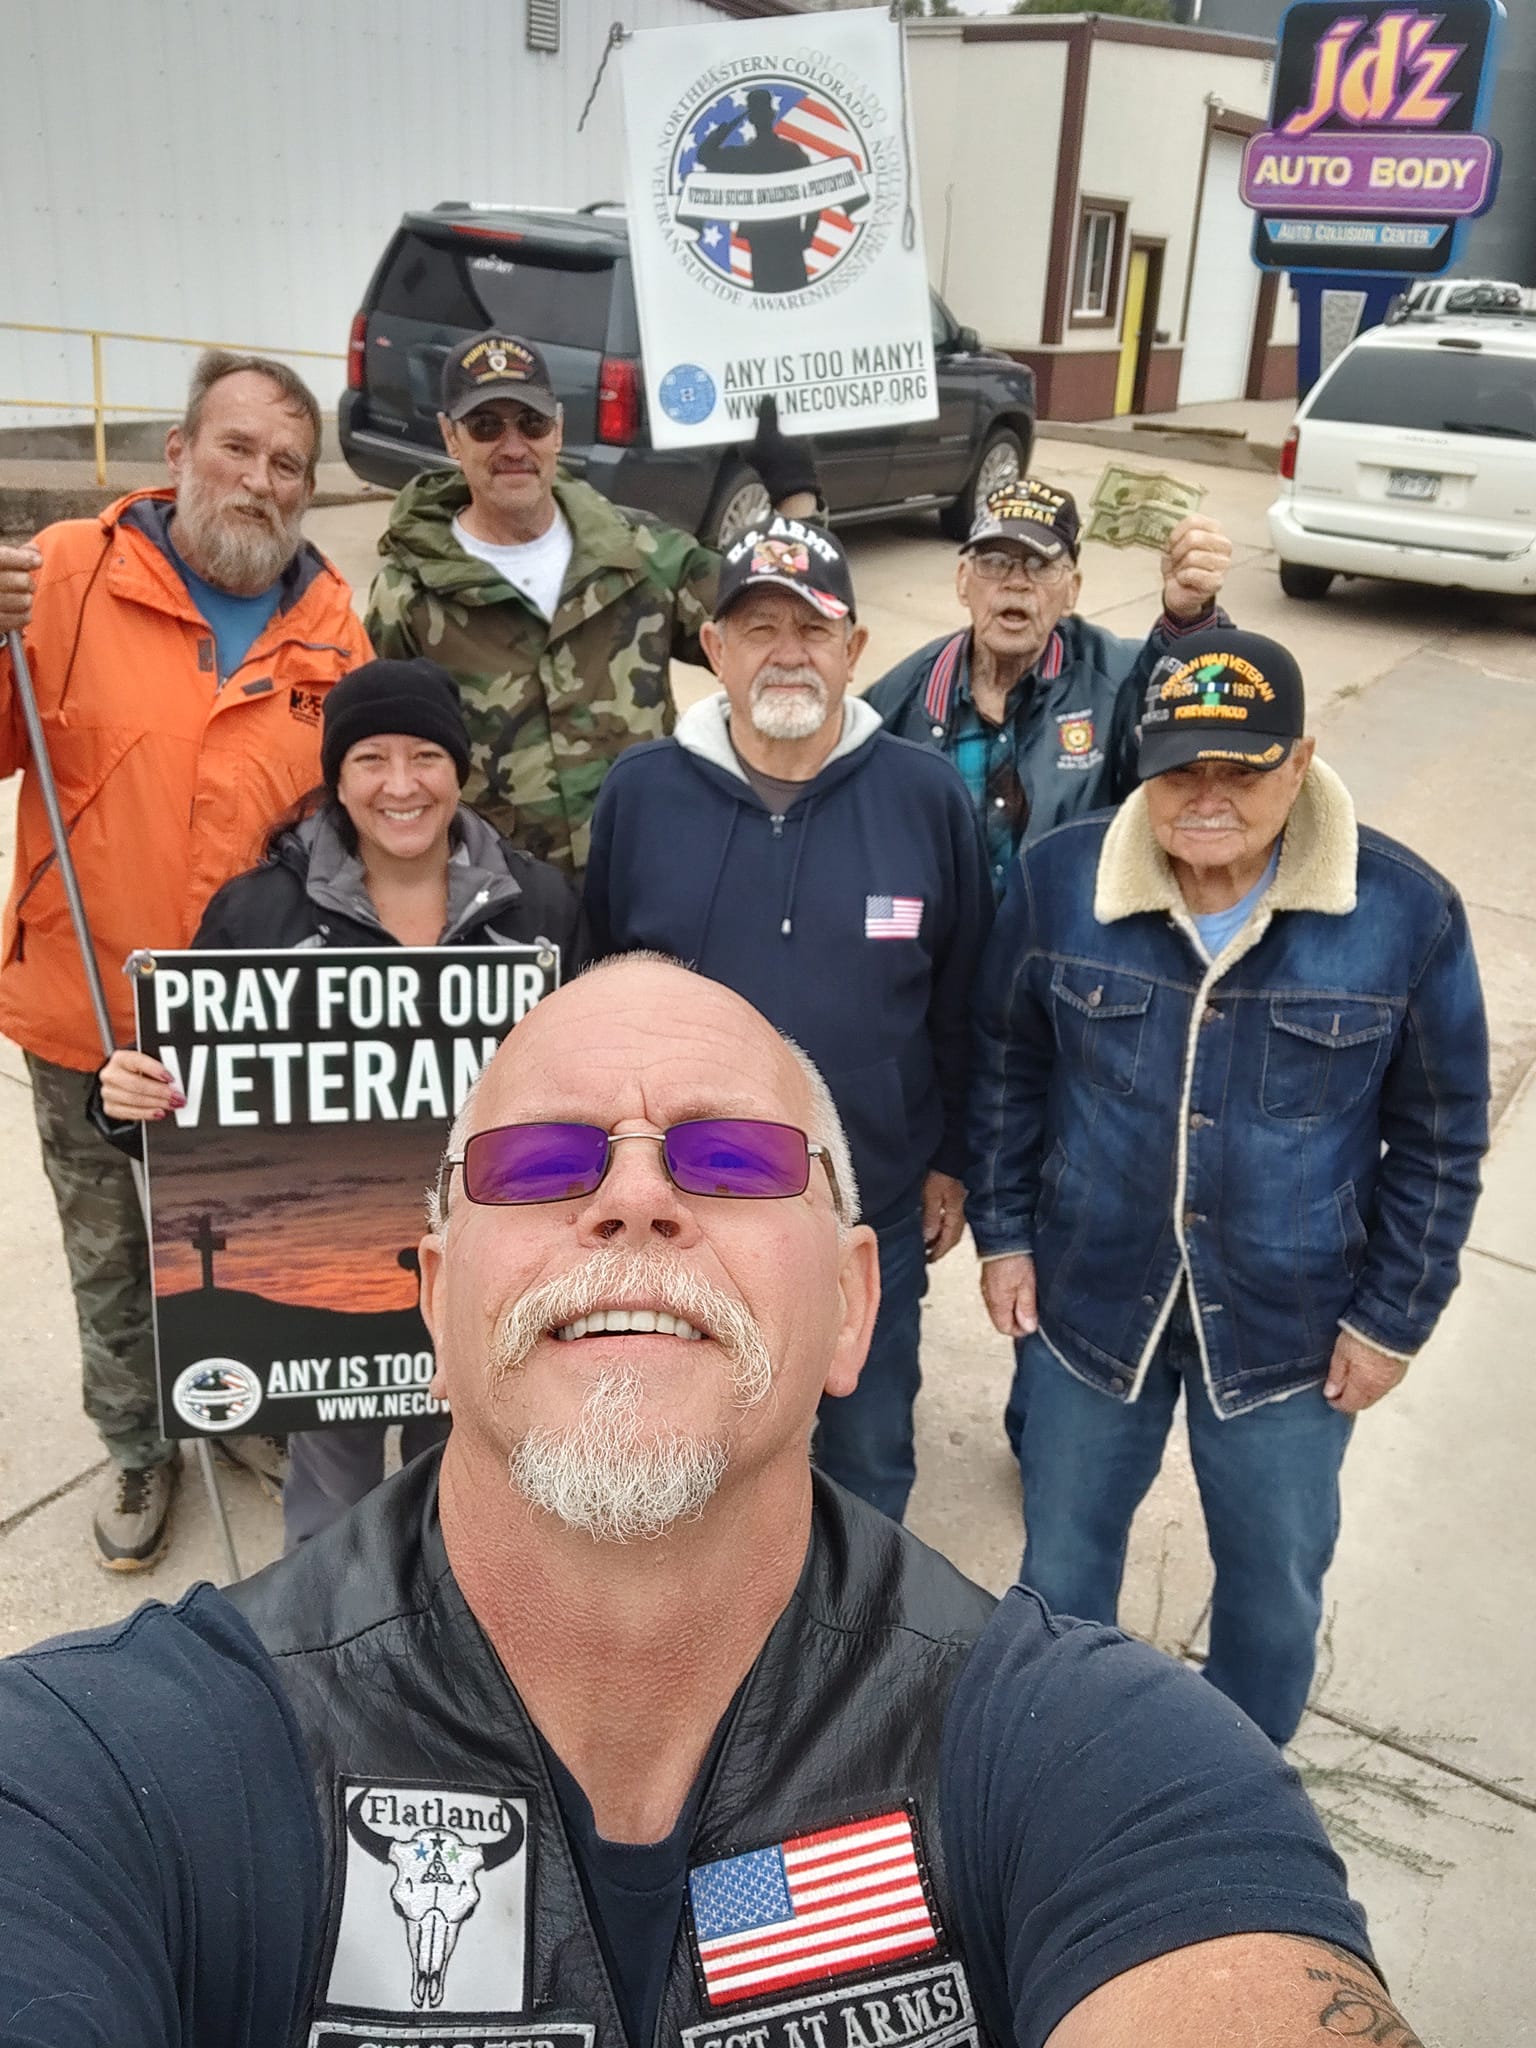 A Group of Veterans and Patriots, gathered to create awareness of the Veteran Suicide Epidemic.